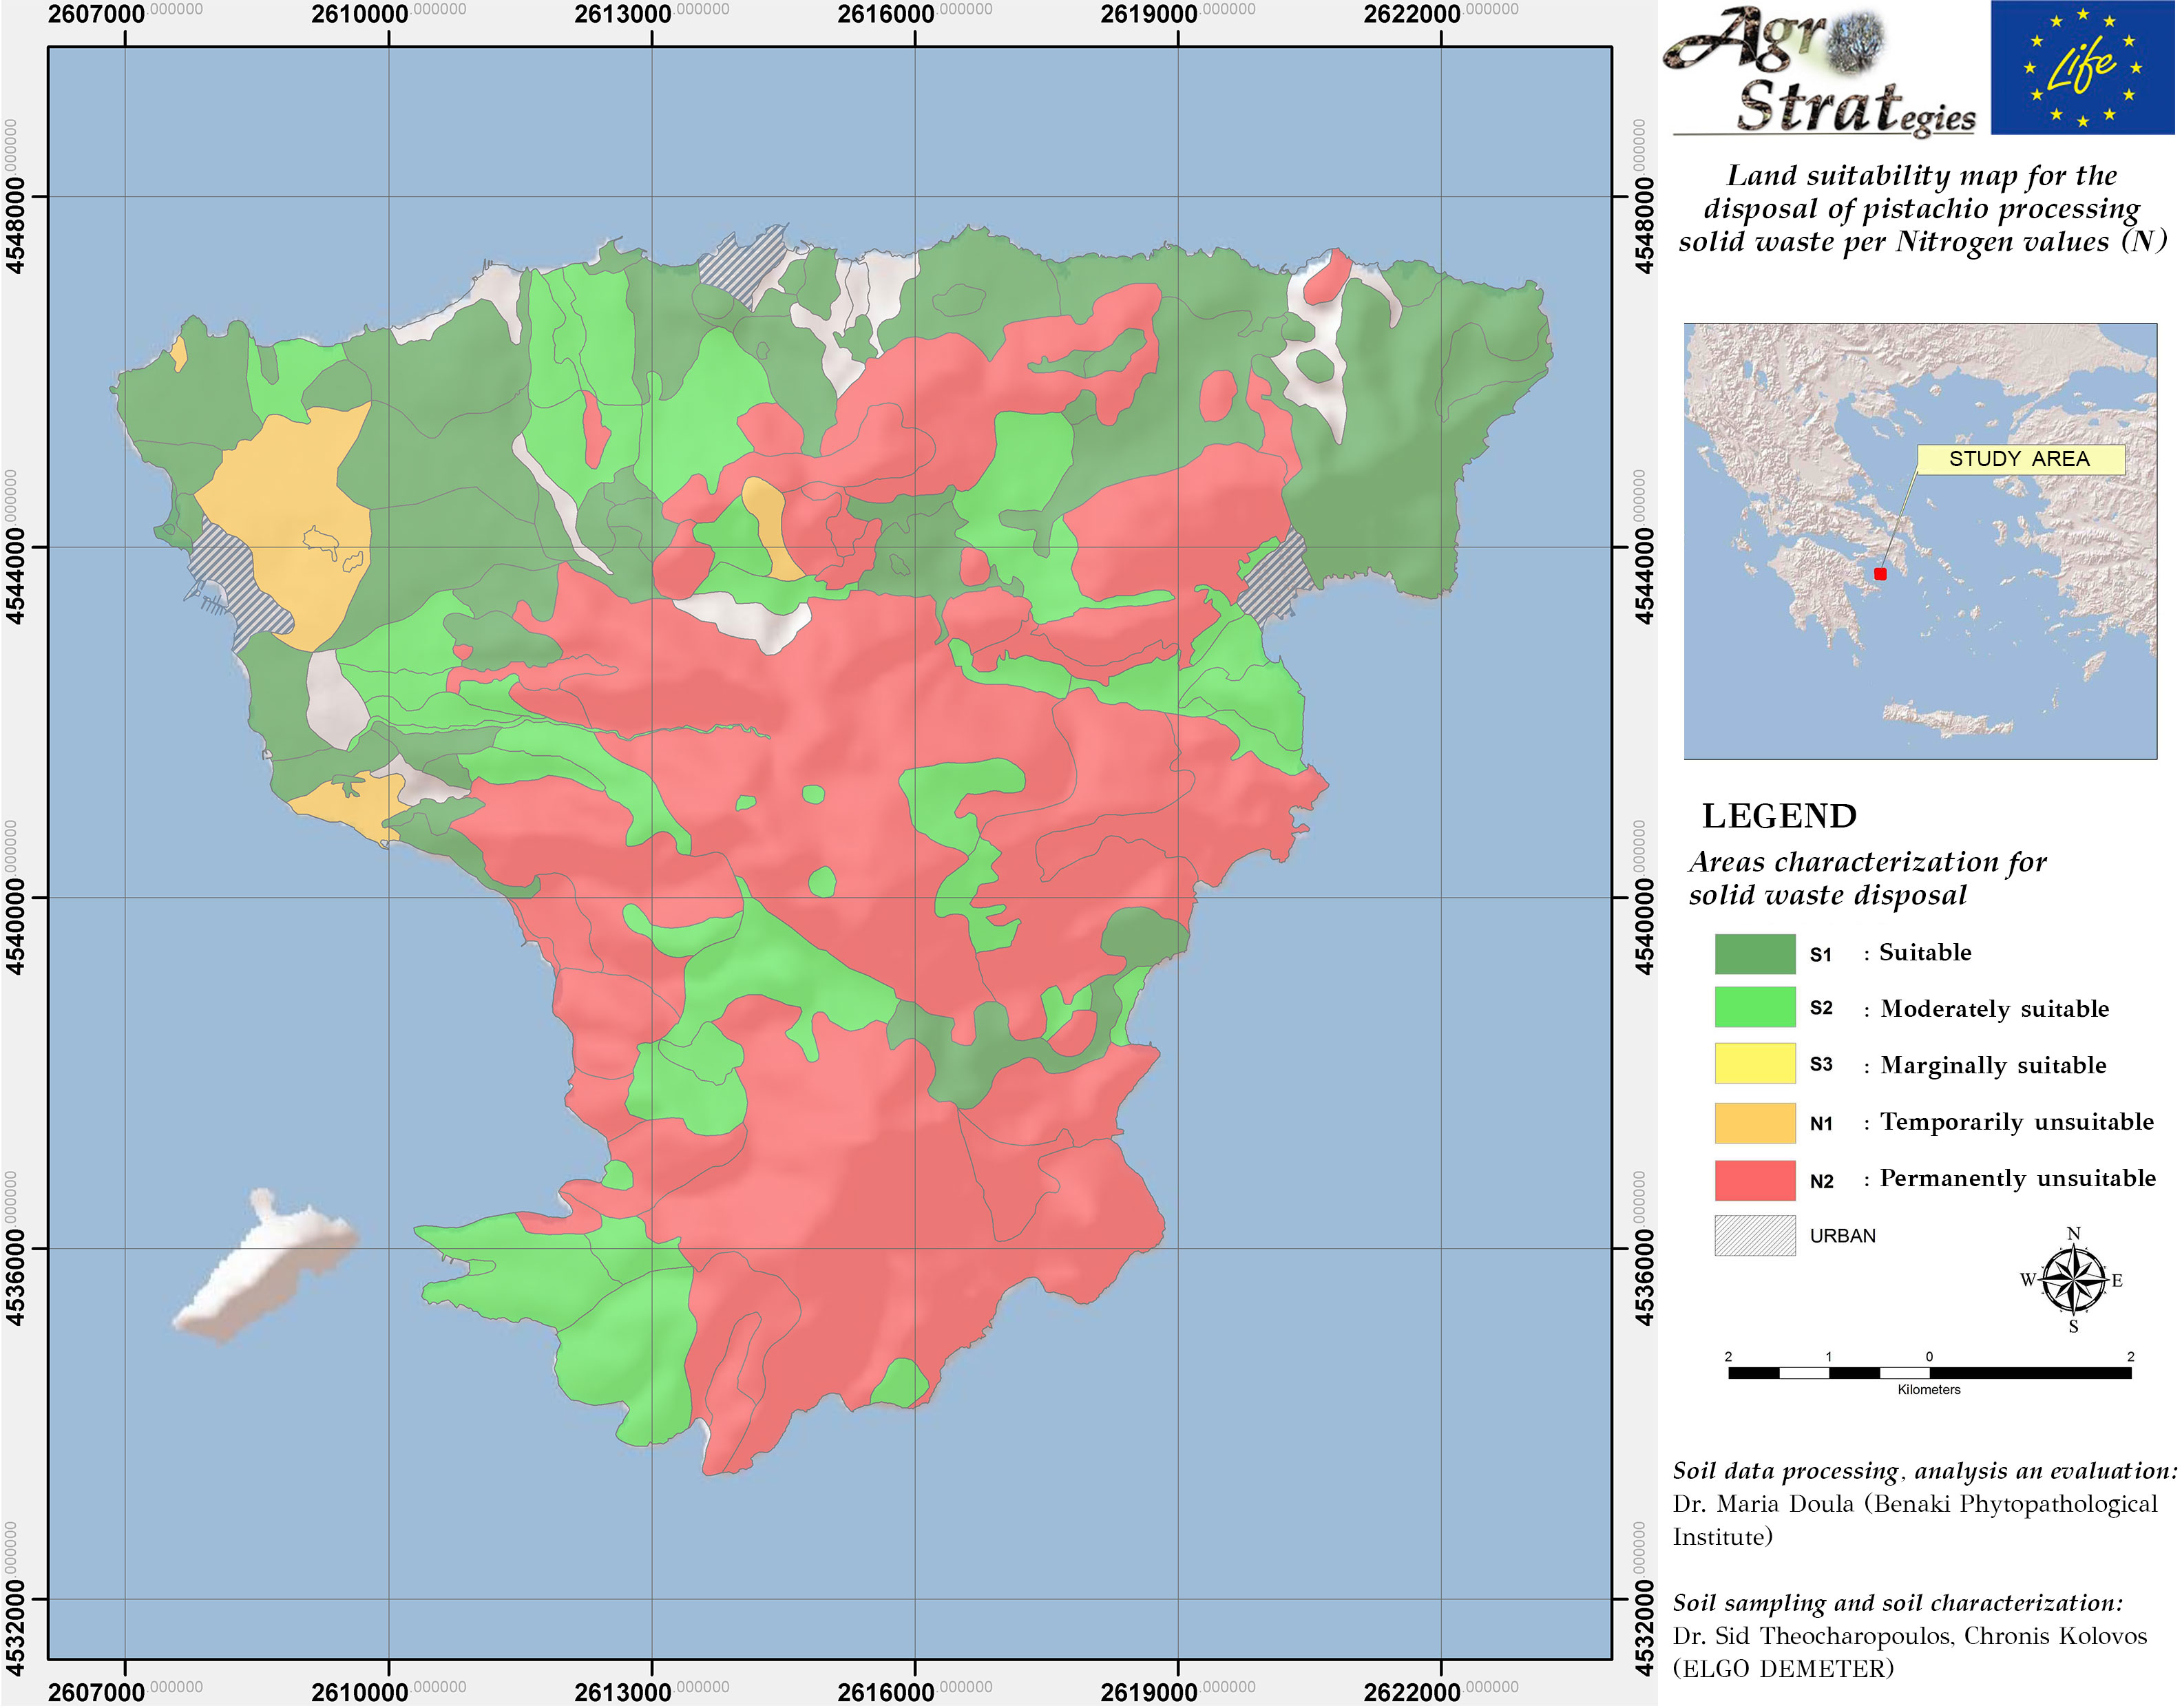 Dr. Maria Doula Land Suitability Map of Aegina island, Greece, for the distribution of solid pistachio waste as per soil total Nitrogen content (LIFE-AgroStrat)